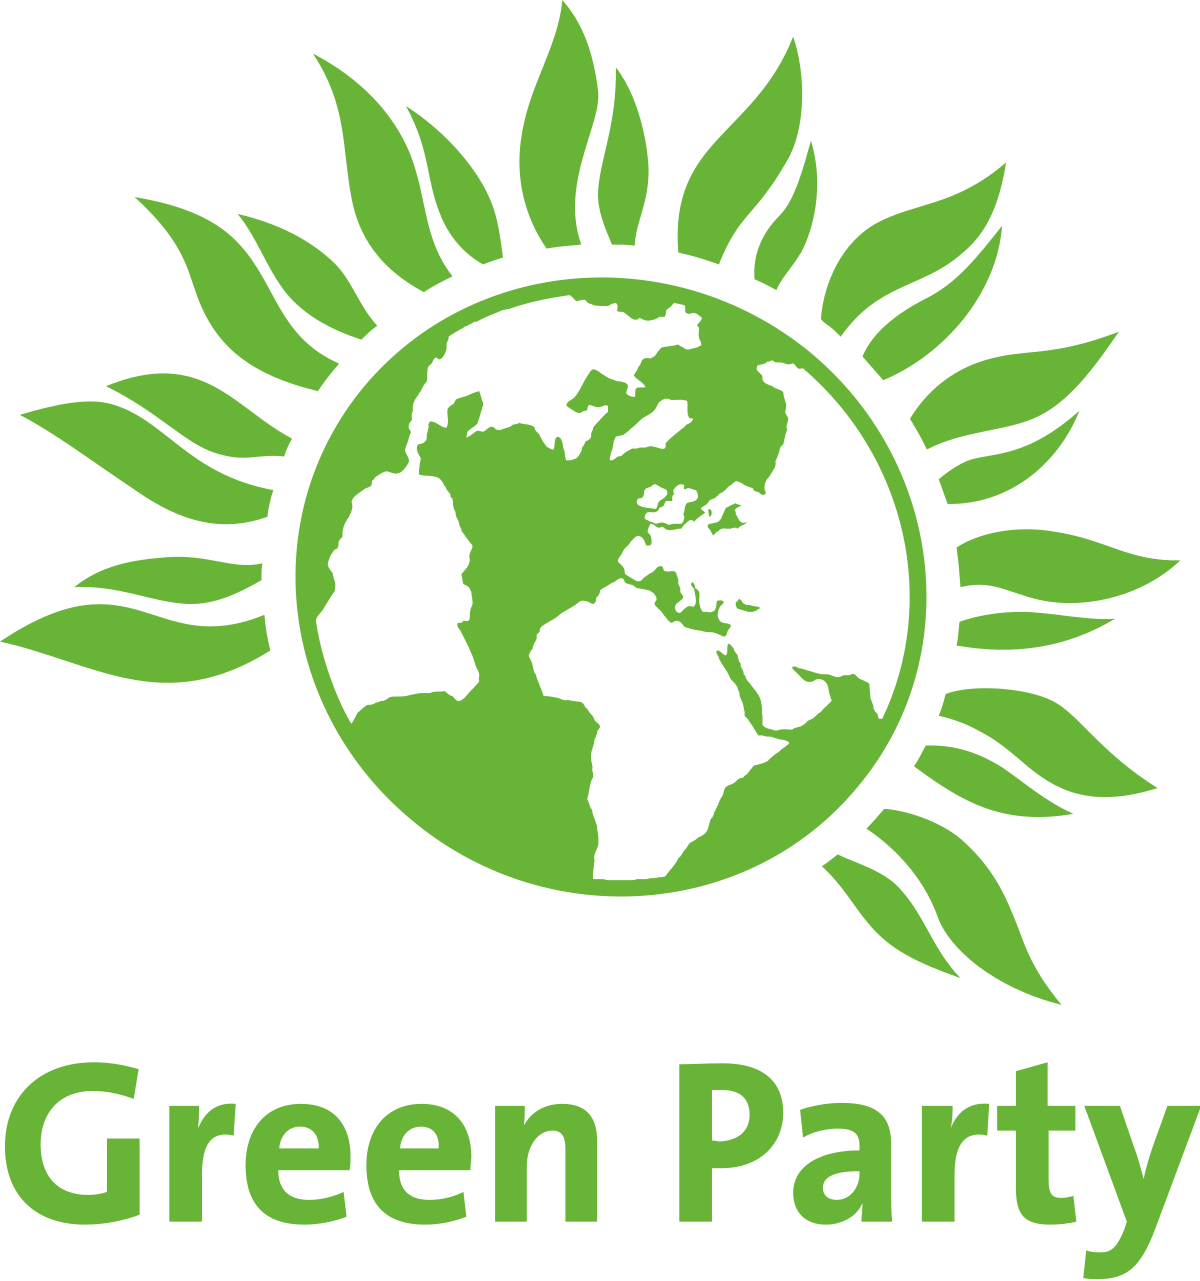 Green Party Logo - Green Party of England and Wales